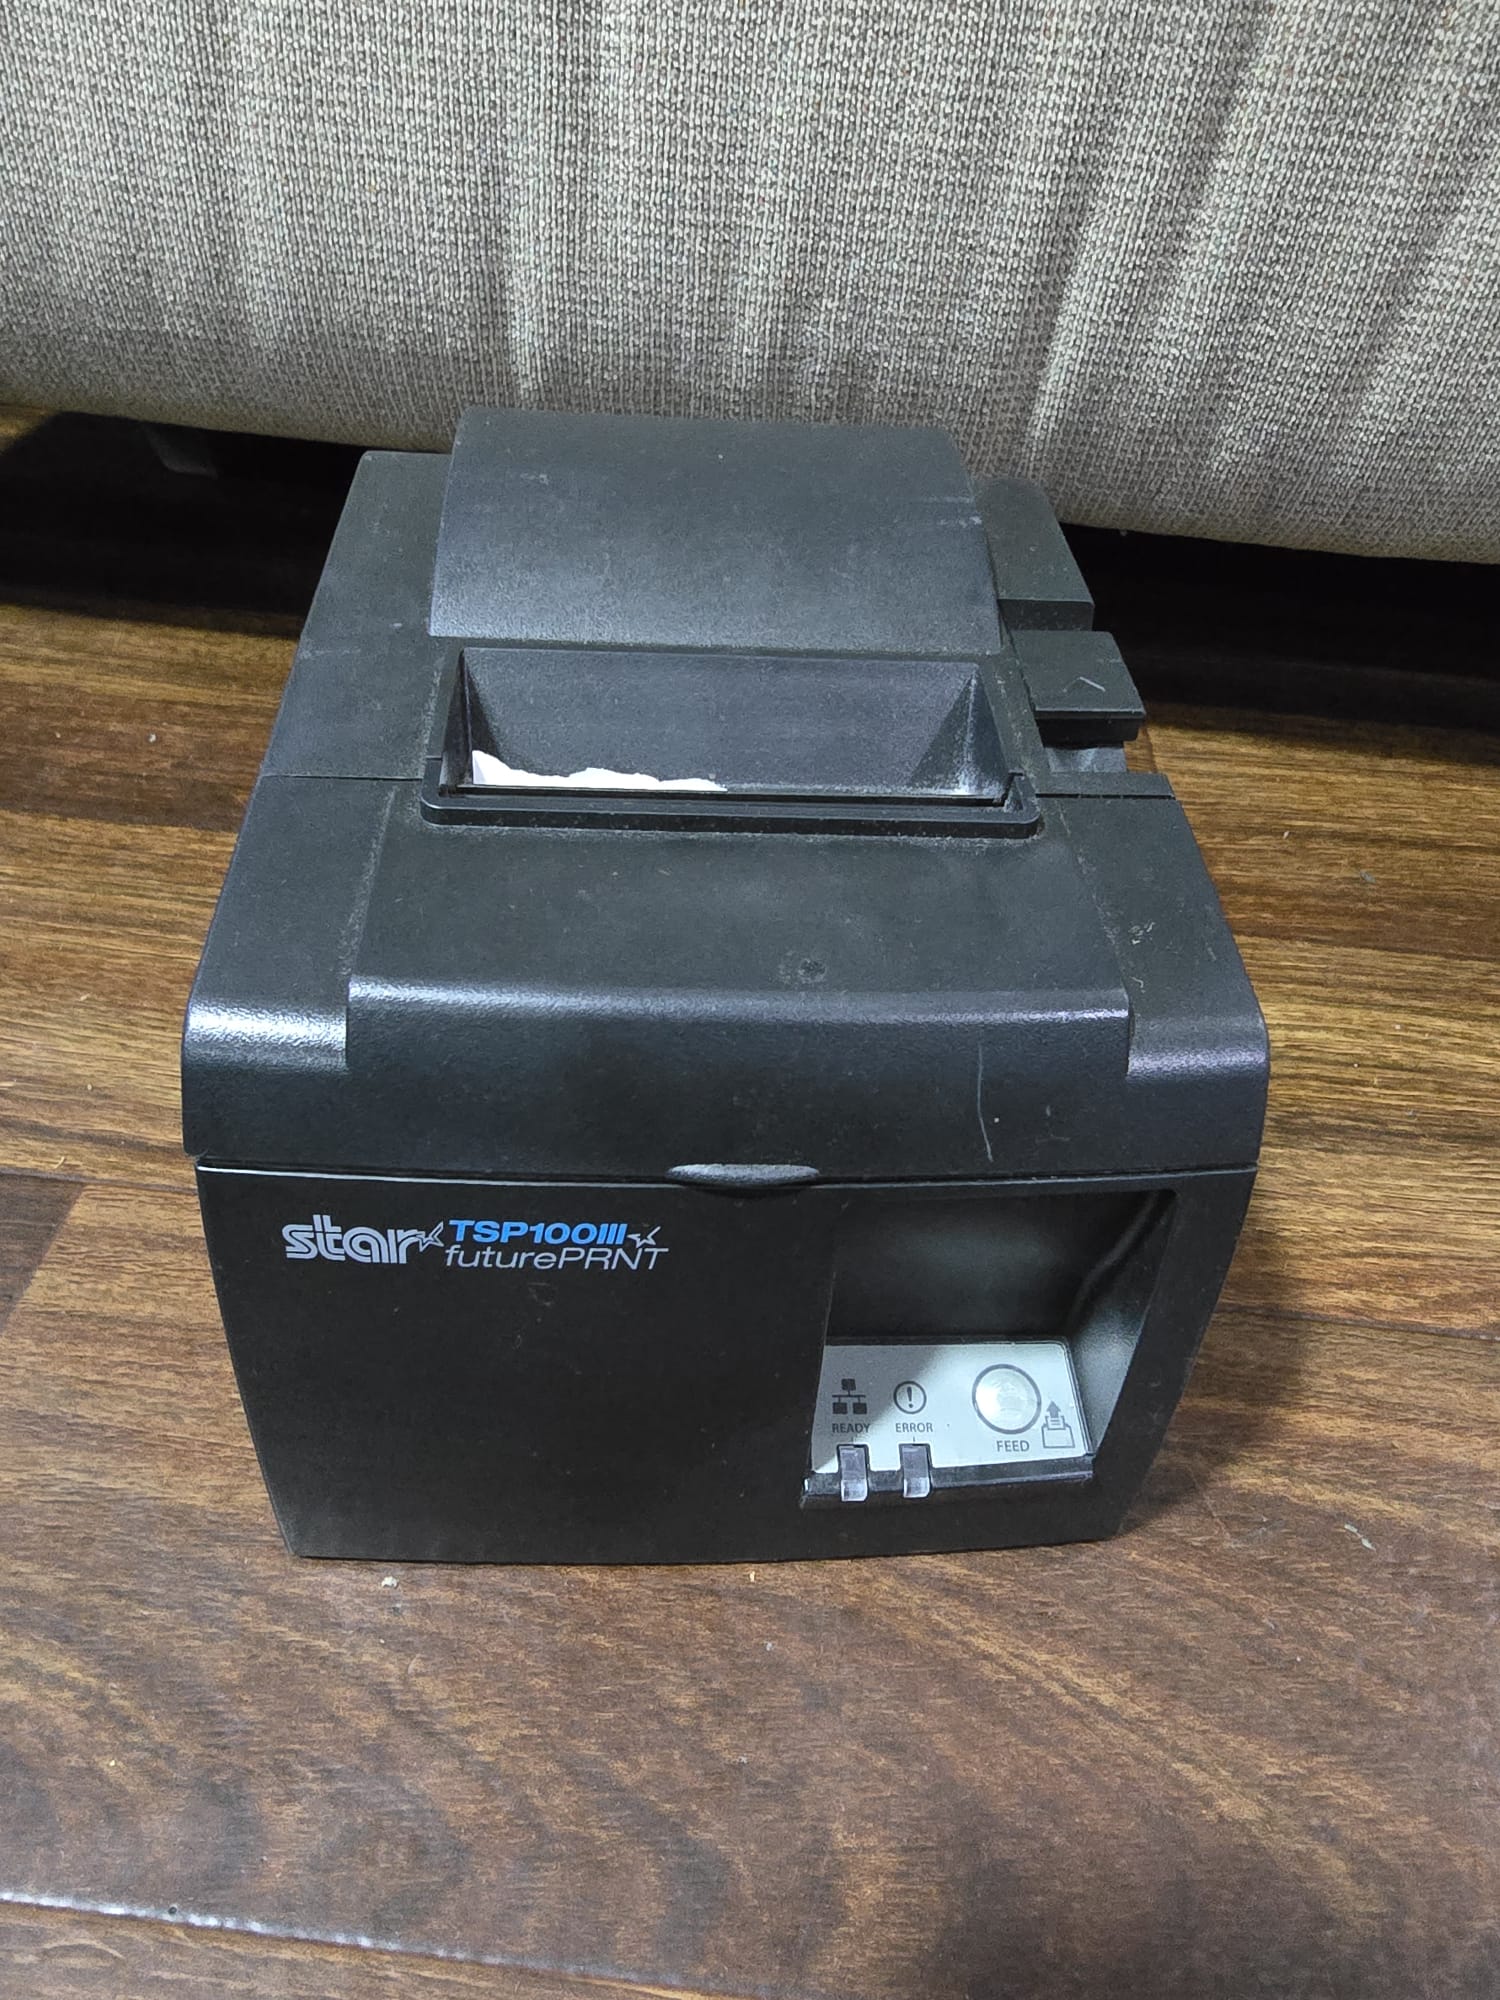 pos system, thermal printer, cash register, apple monitor, mouse, imac, printers, graphics card, 